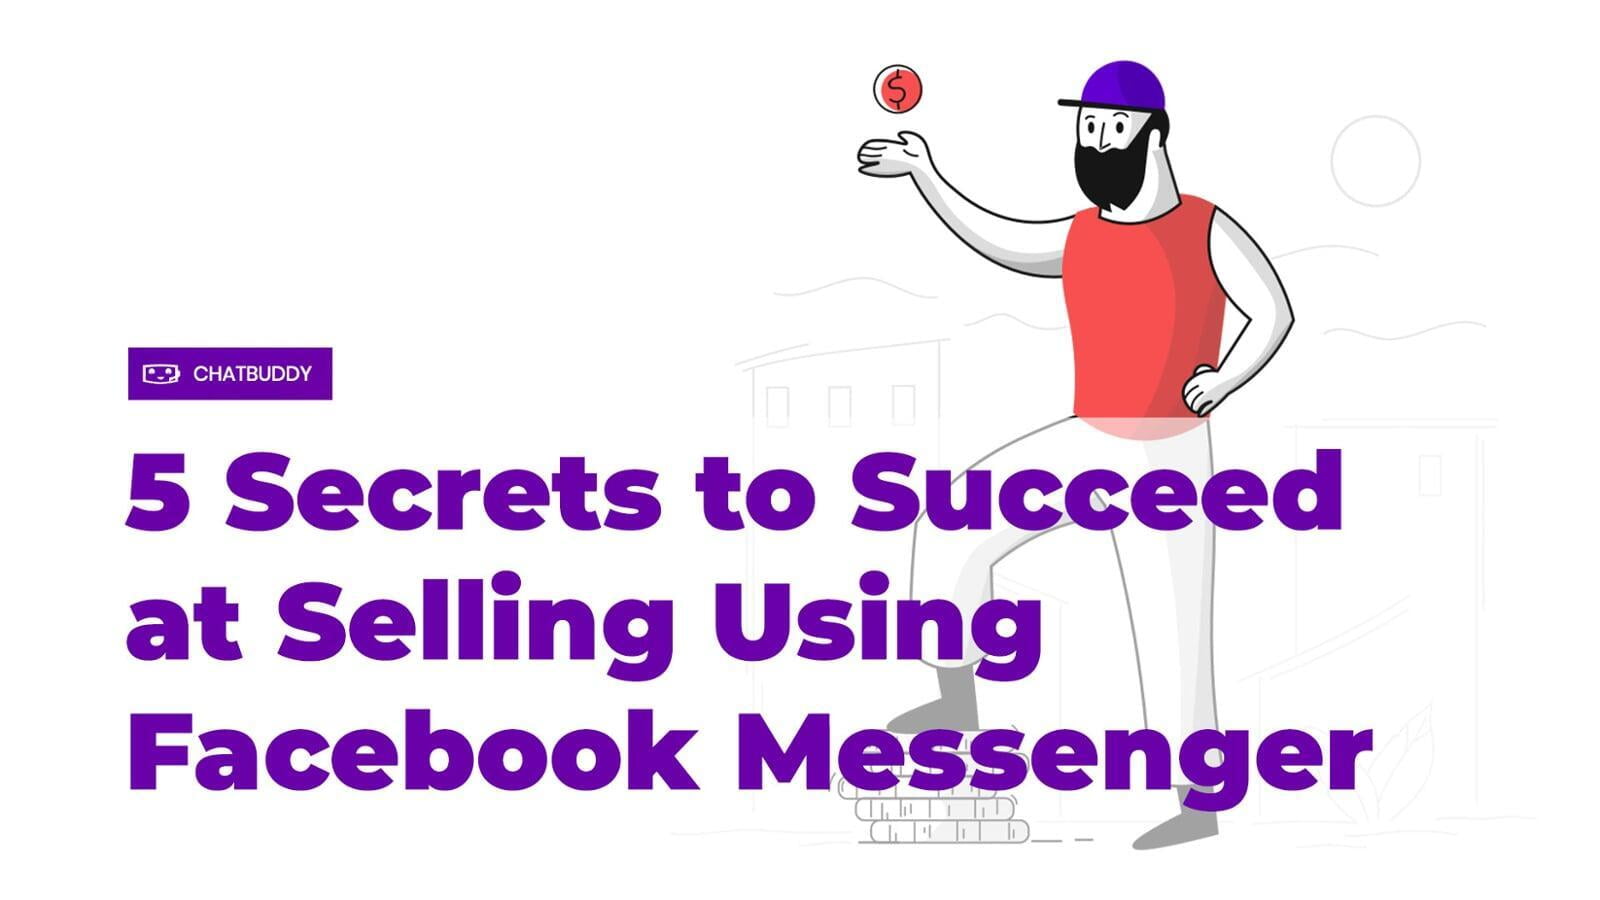 5 Secrets to Succeed at Selling Using Facebook Messenger